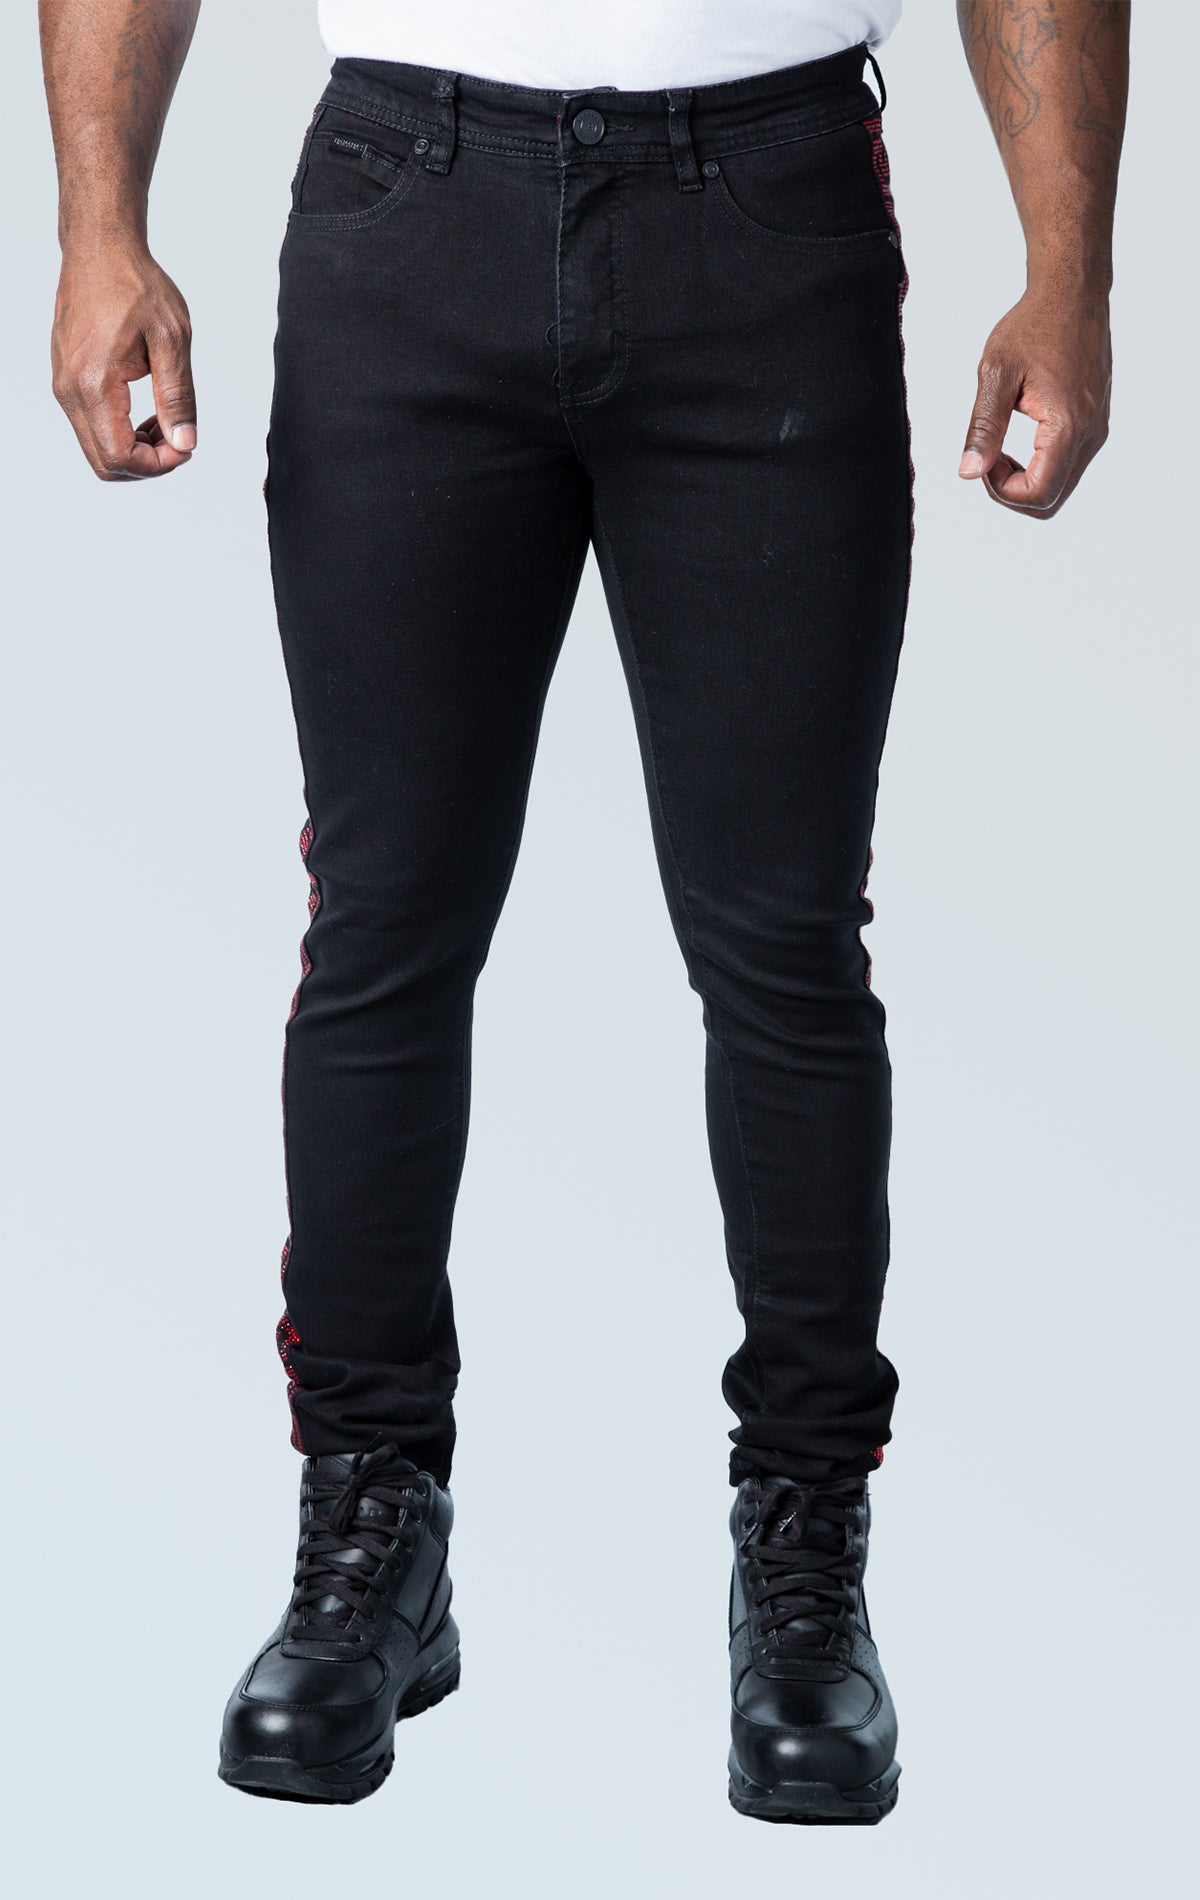 Men's slim-fit jeans in a dark wash with a Greek key design throughout the fabric. The jeans have a regular waist, five pockets, a zip fly with button closure, and a 32-inch inseam. Made from a comfortable blend of 70% cotton, 28% polyester, and 2% spandex.